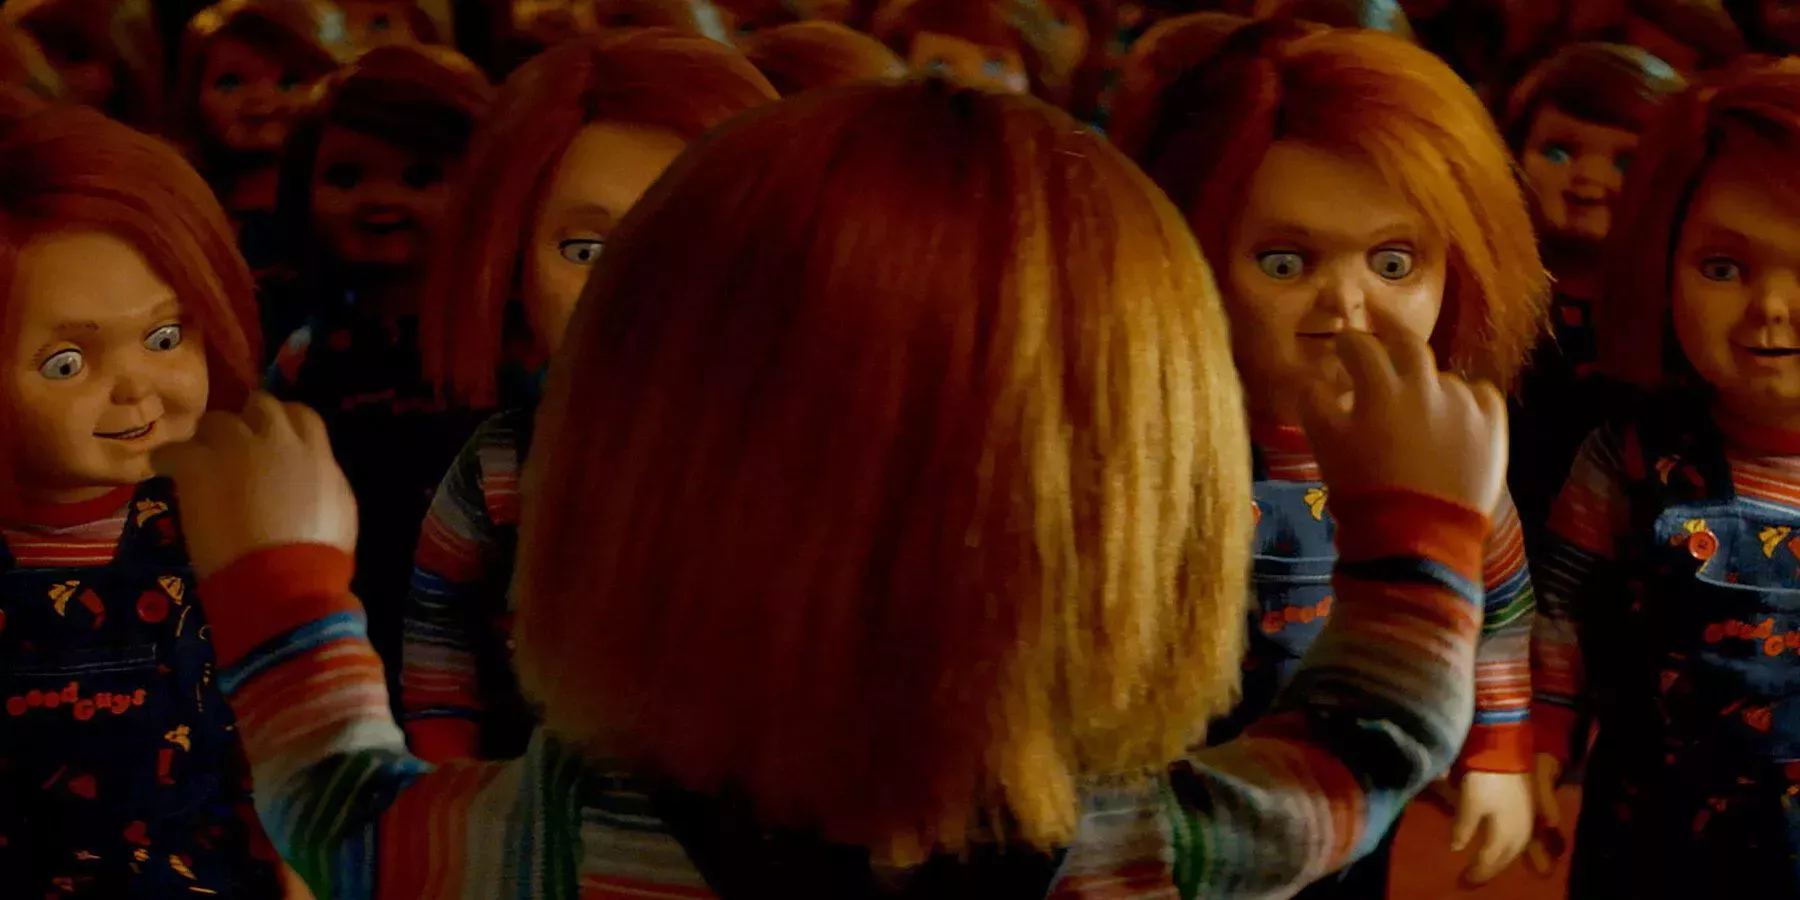 Chucky instructs an army of Good Guy Dolls